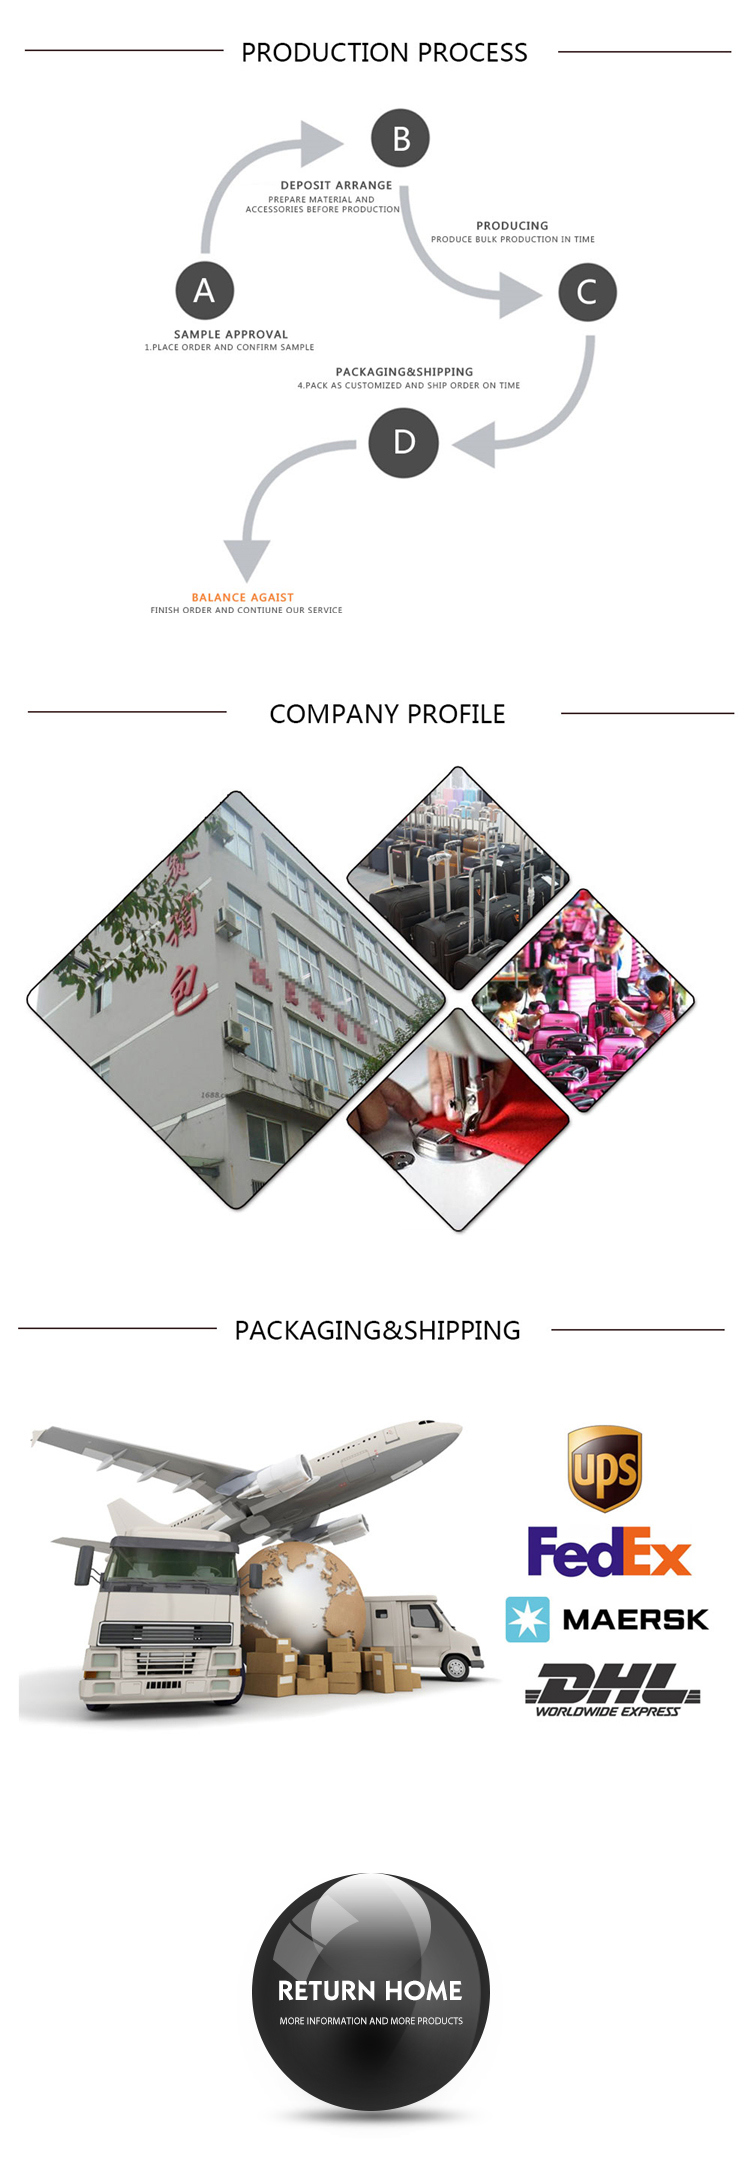 Business Bags with Wheels and Cases PU Leather Trolley Luggage